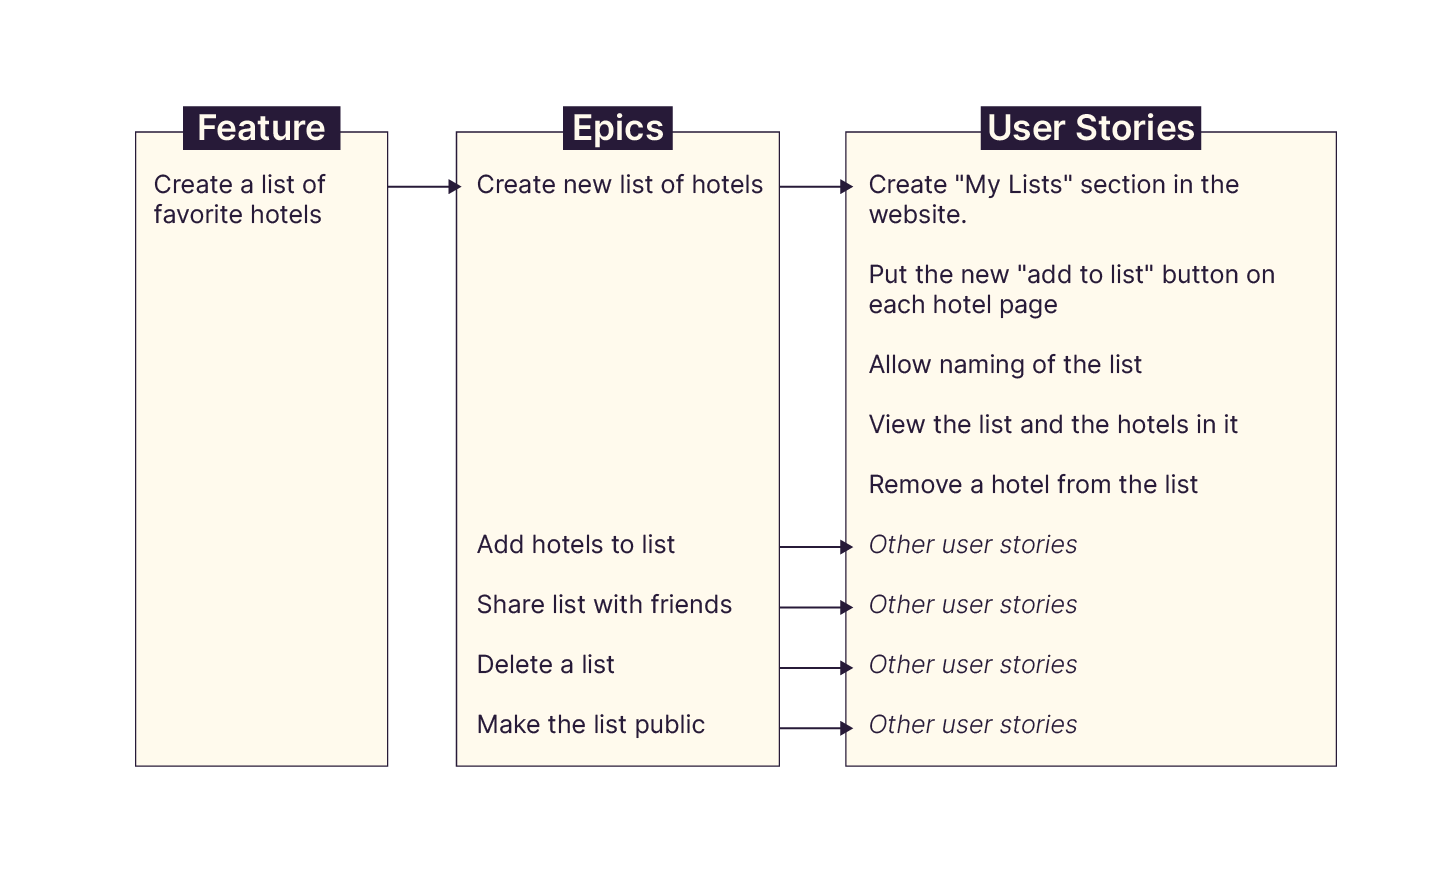 The image displays a flowchart detailing the breakdown of a software feature into epics and user stories. It shows 'Create a list of favorite hotels' as the main feature, which is then divided into epics such as 'Create new list of hotels', and further in